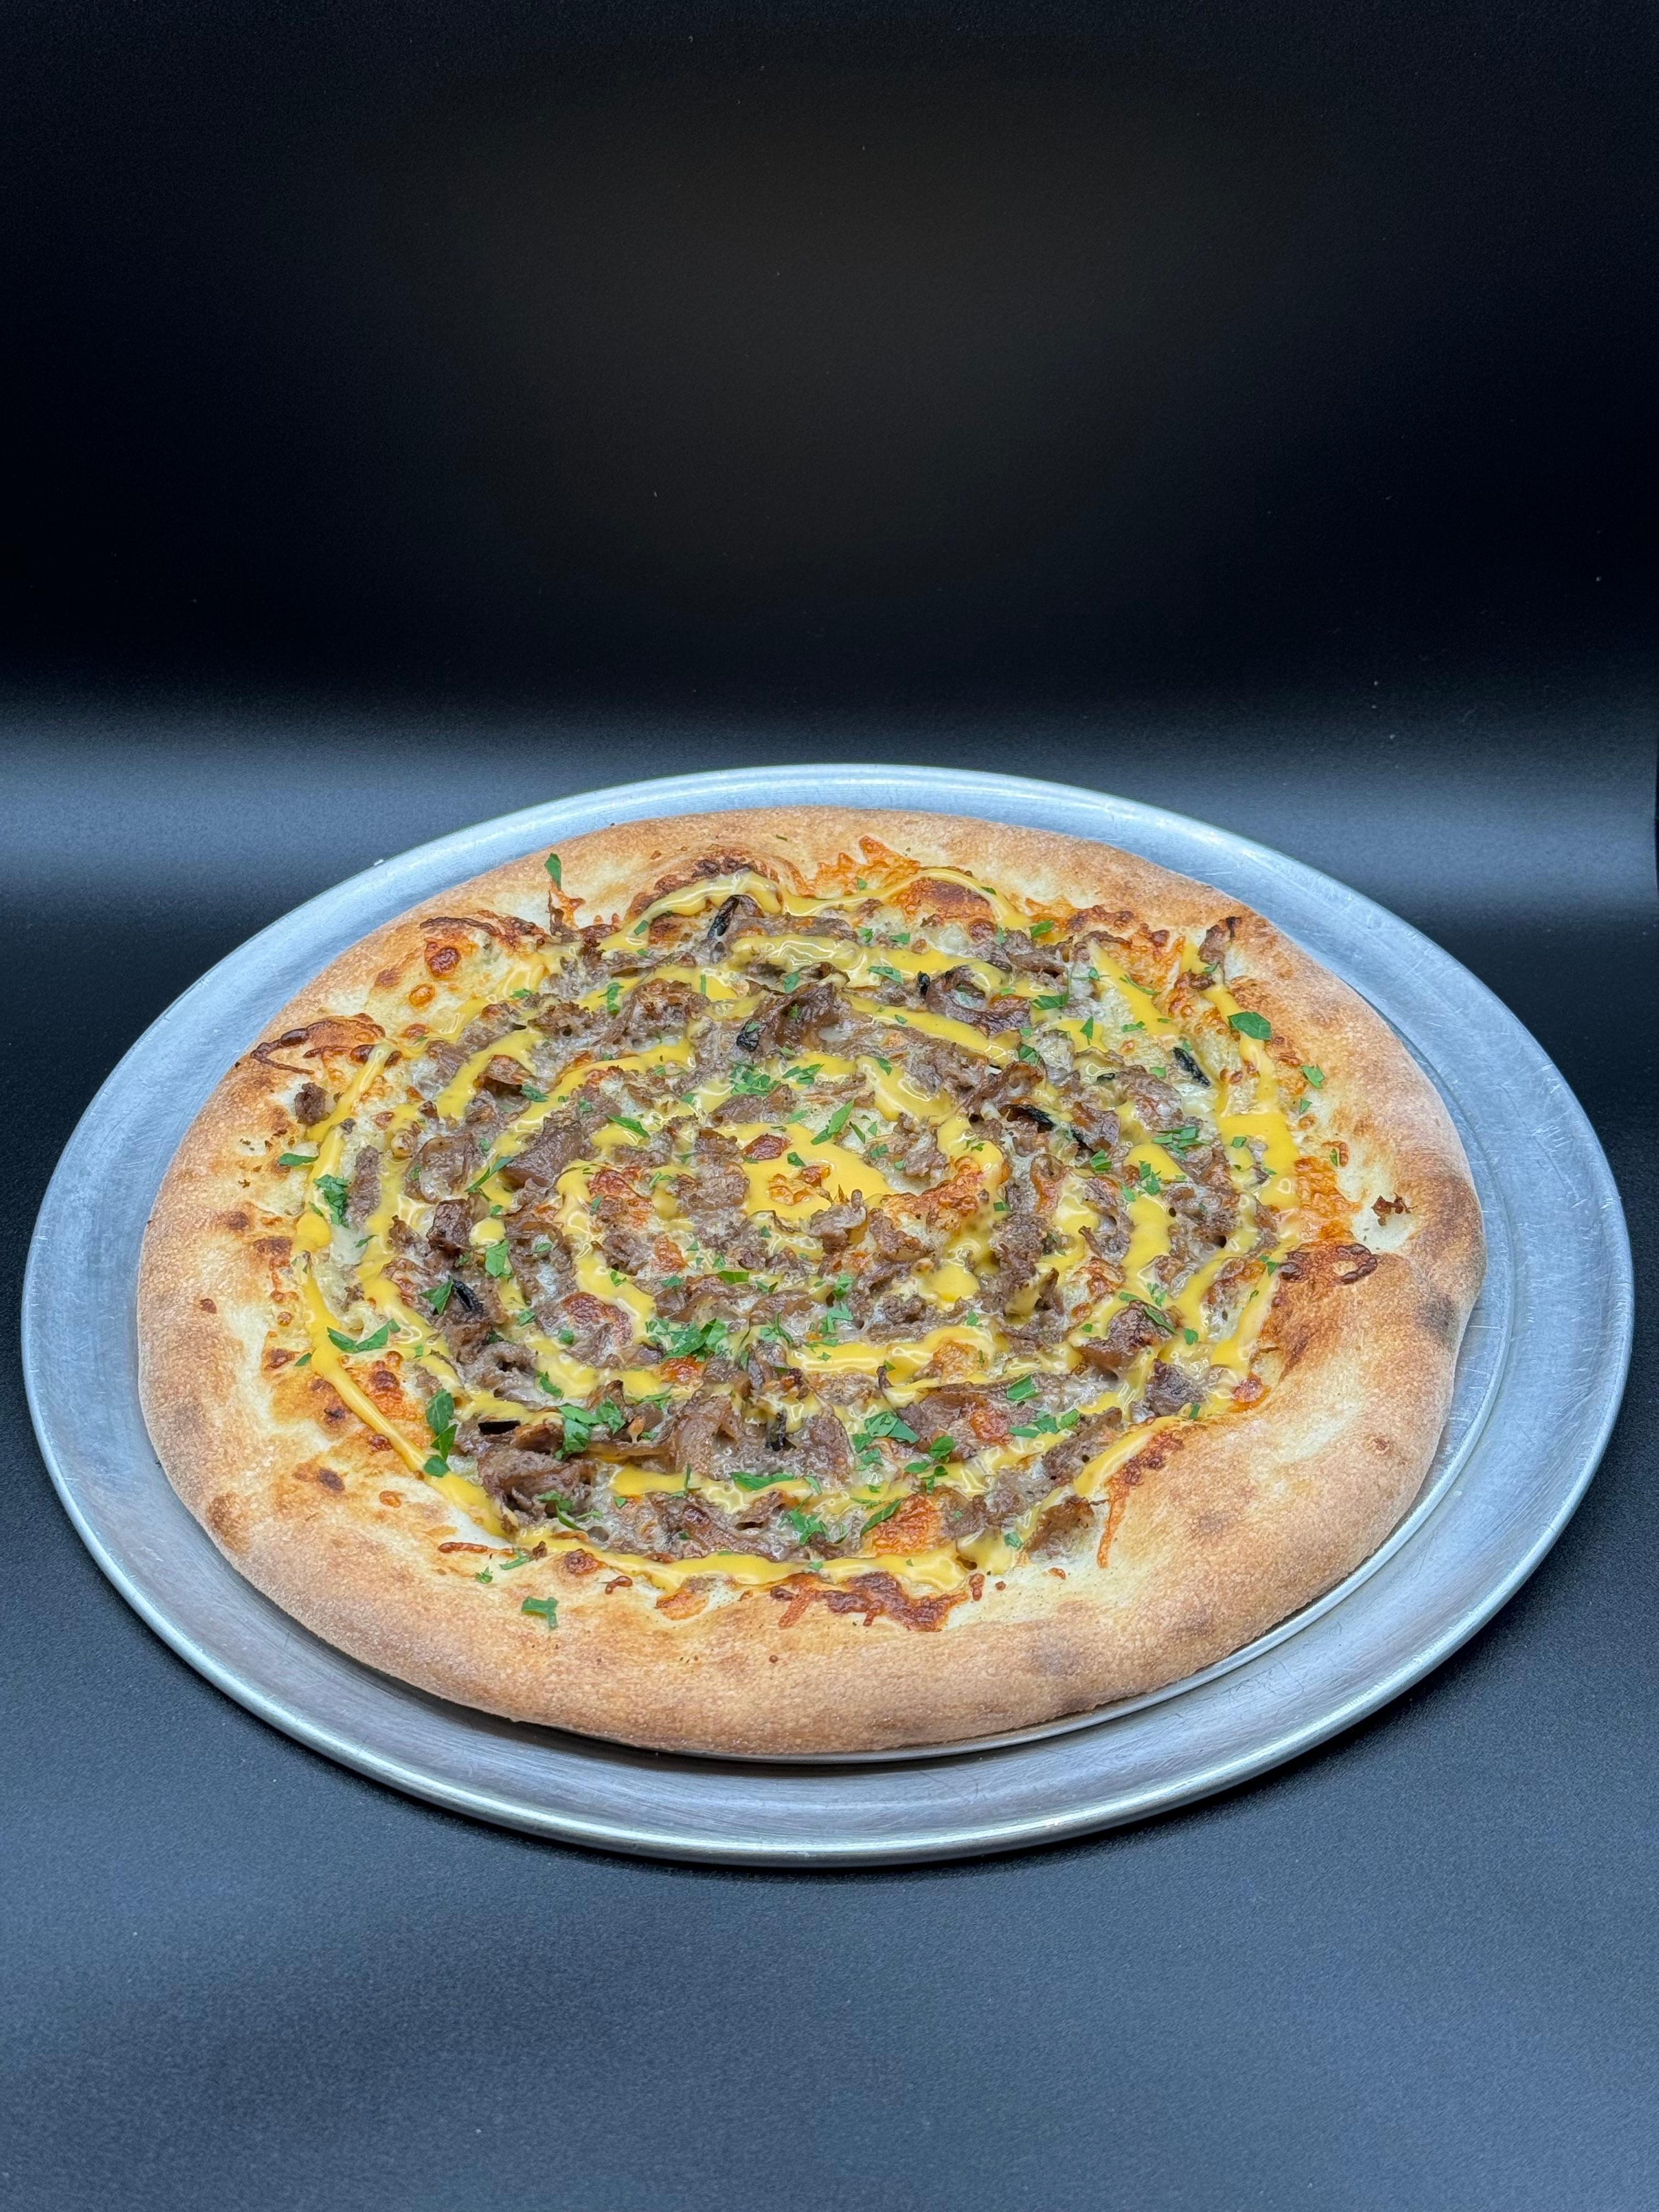 Philly Cheesesteak Pizza 16"